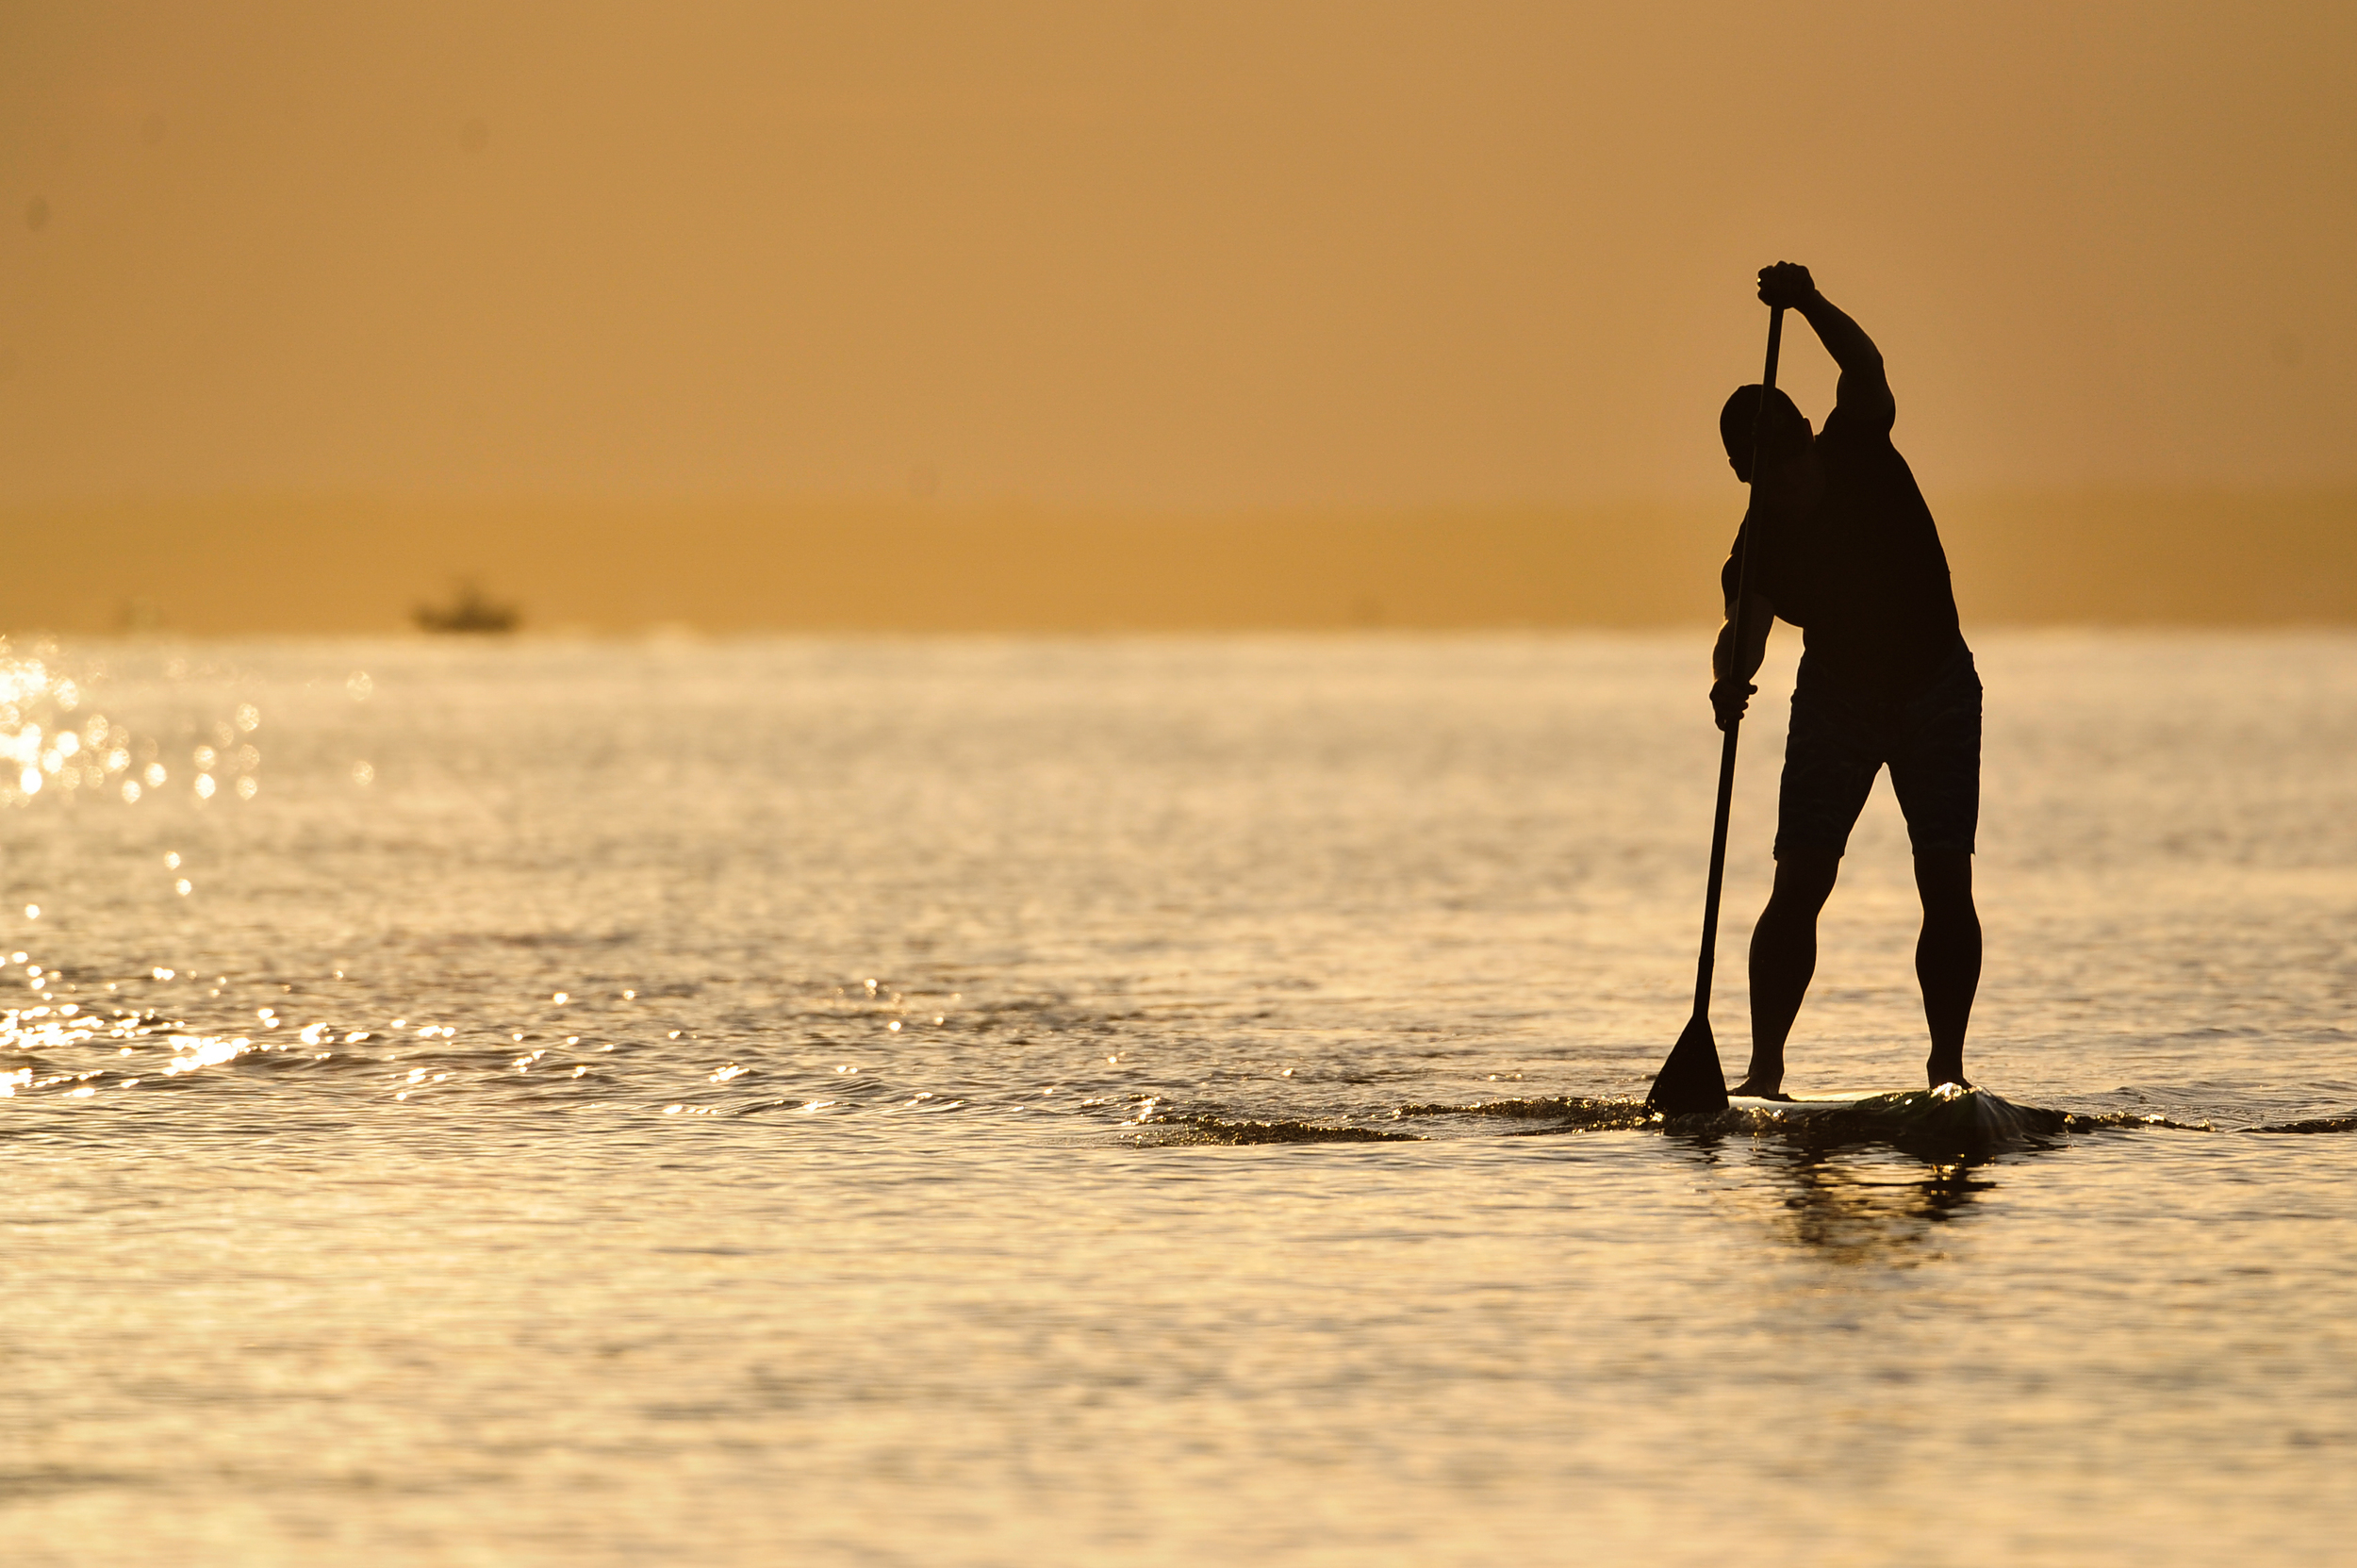 Sunrise SUP | An Annapolis Paddleboarding Destination | Family Friendly  Paddleboarding in Annapolis, MD